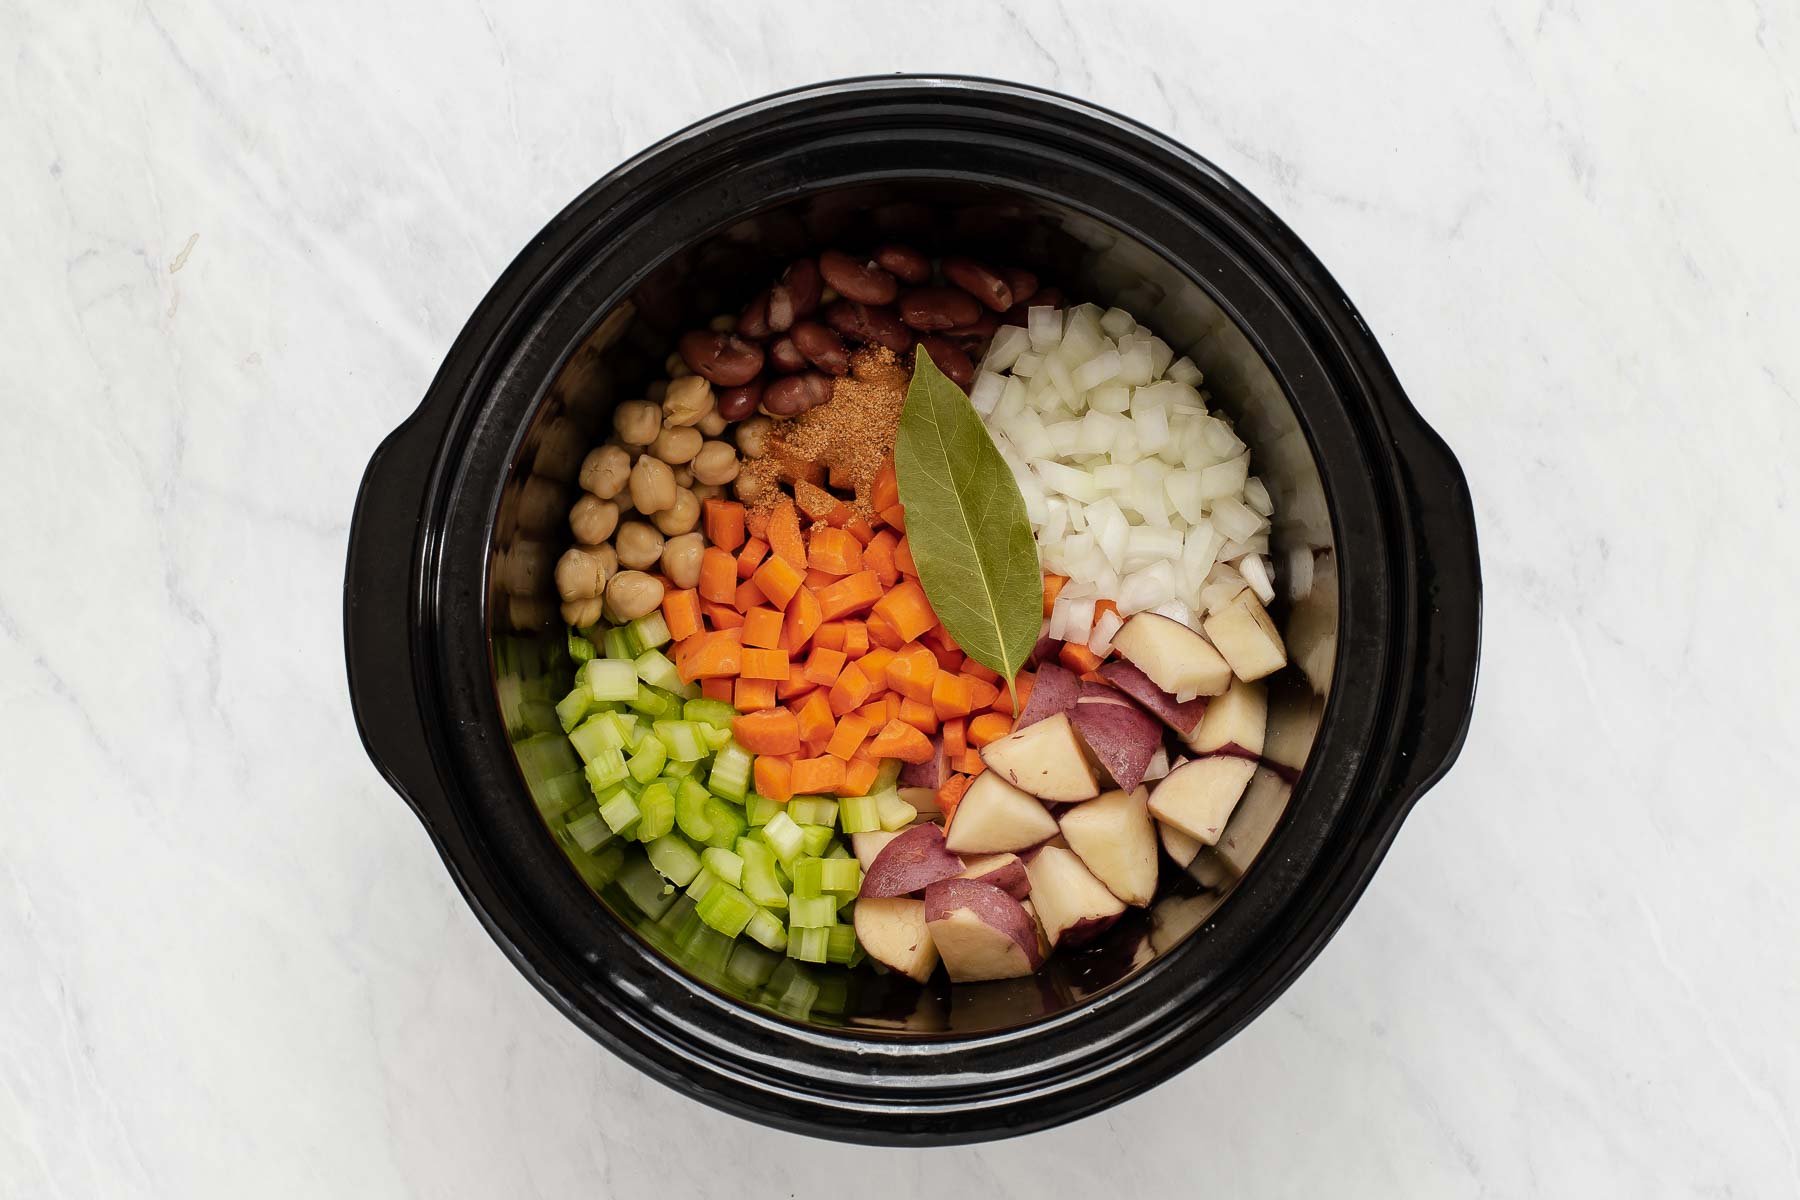 Raw diced carrots, celery, beans and bay leaf in a black slow cooker.